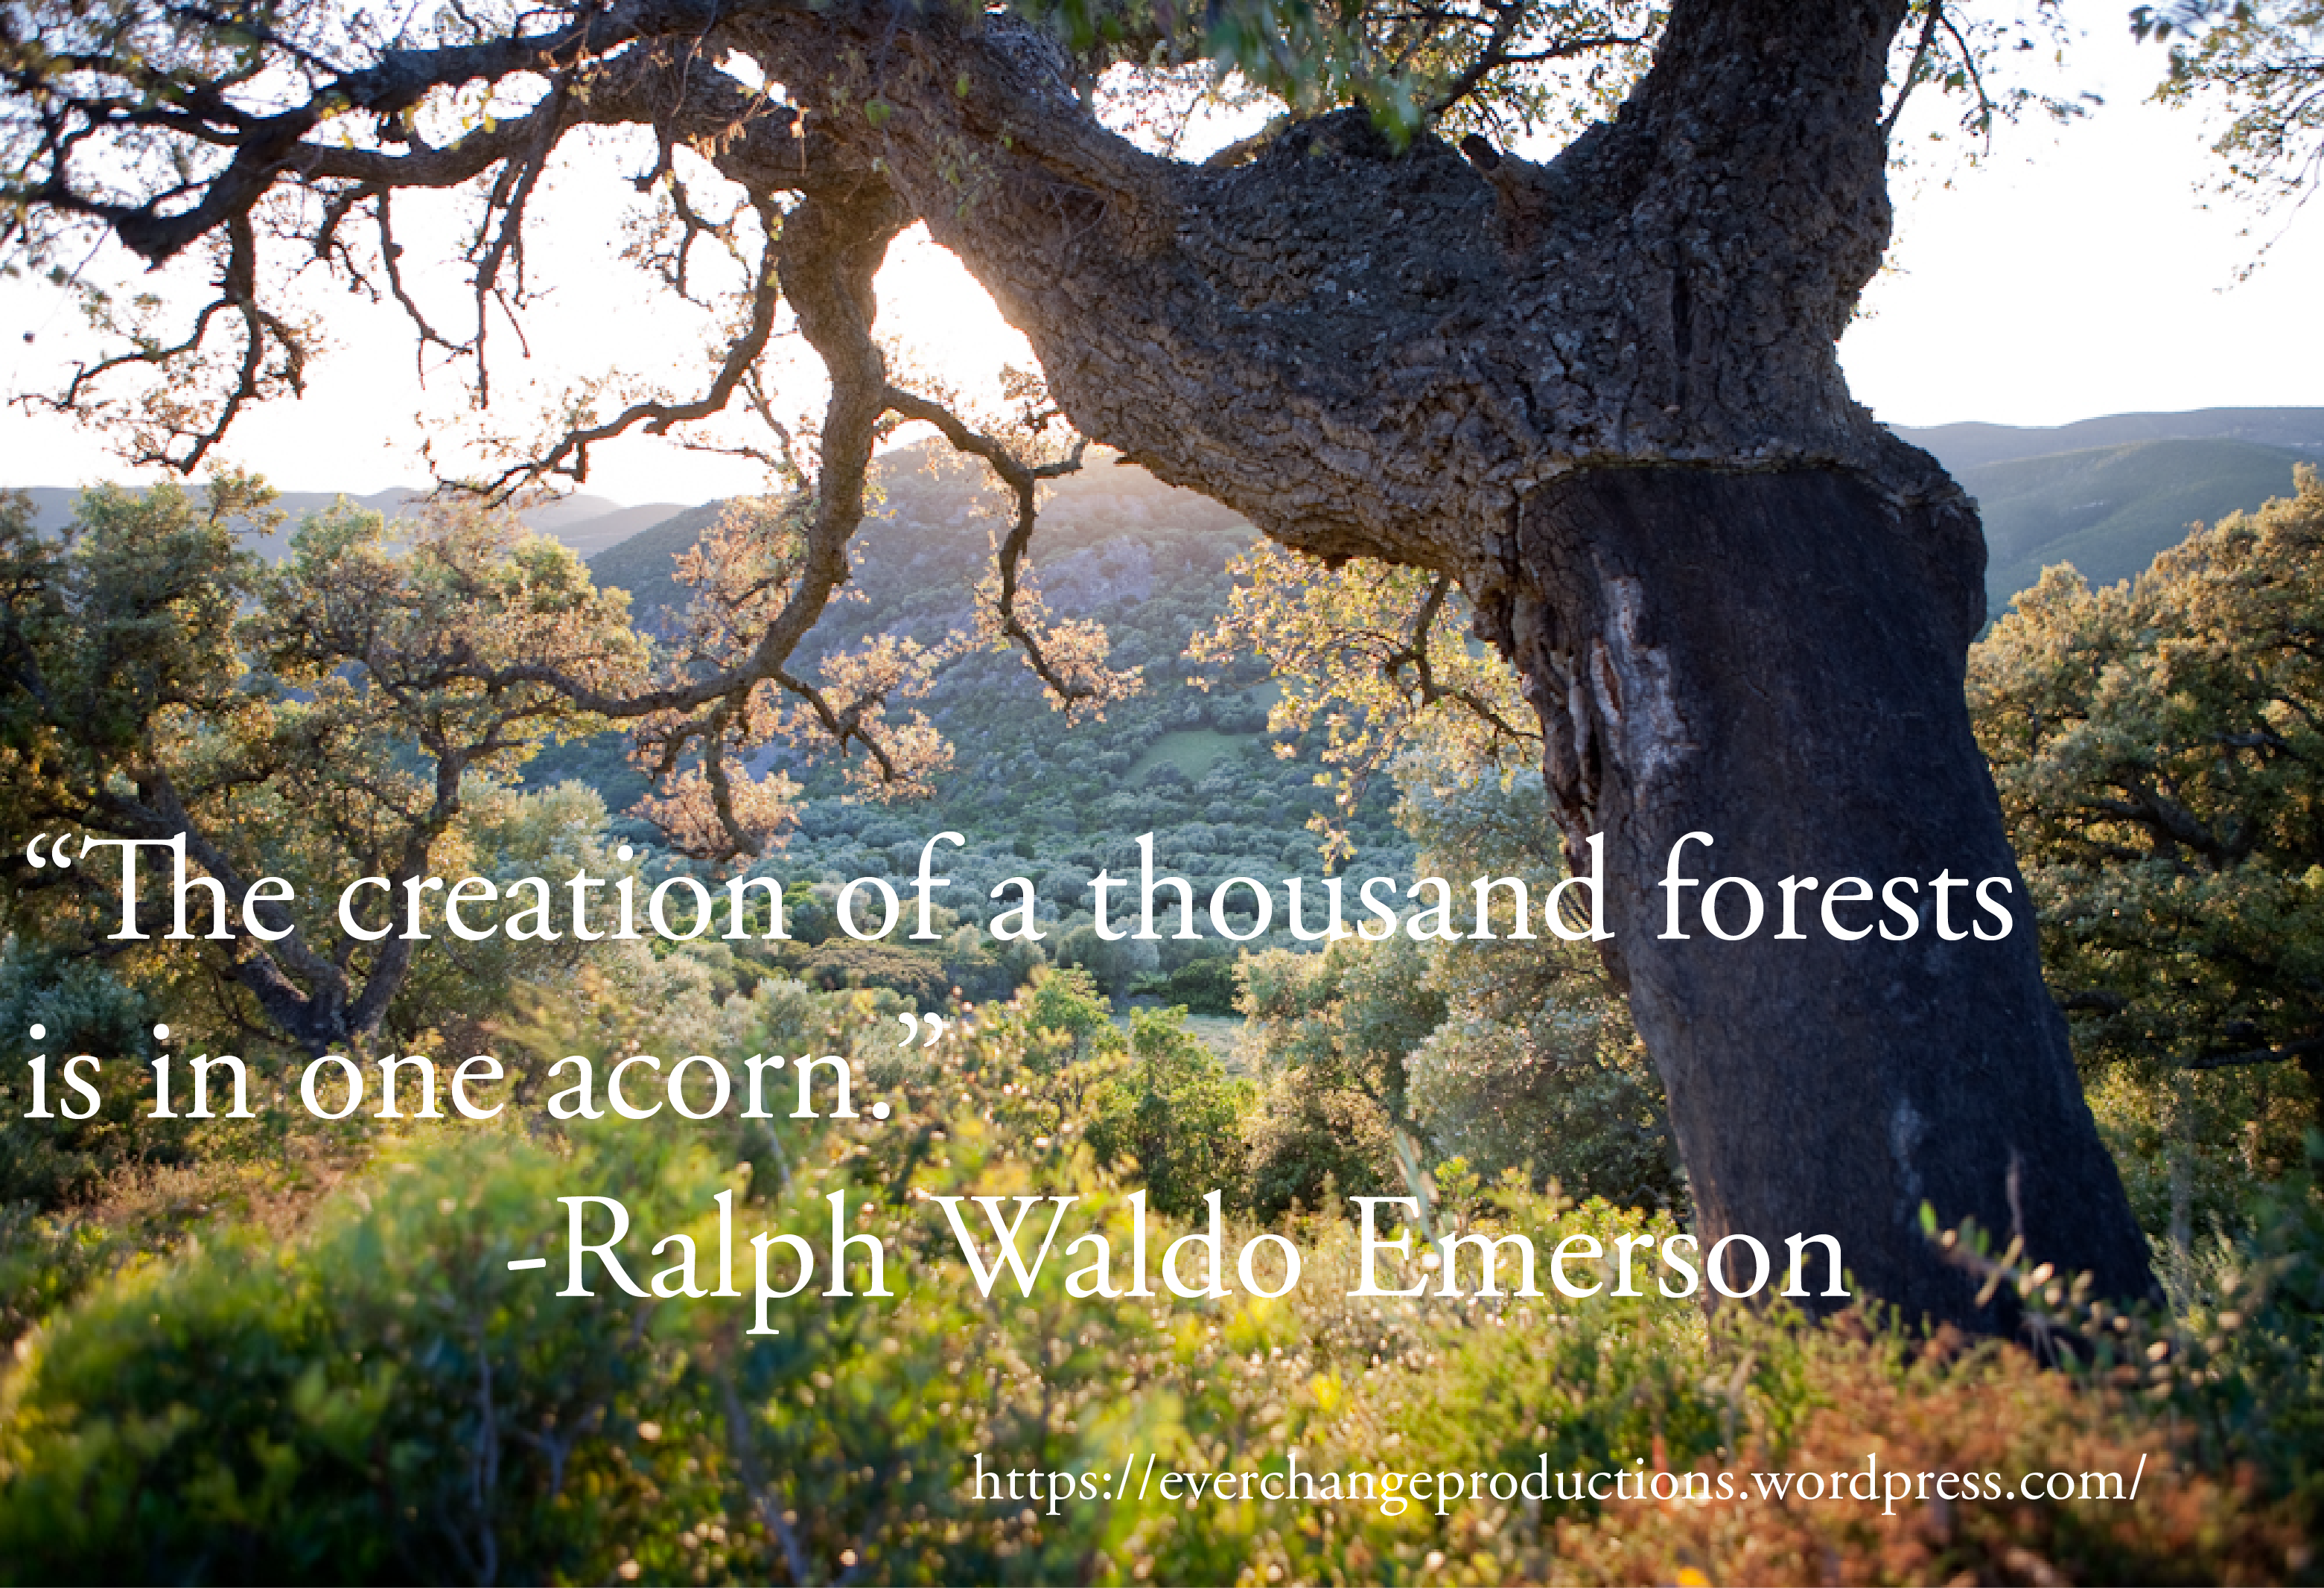 "The creation of a thousand forests is in one acorn." -Ralph Waldo Emerson motivational quote